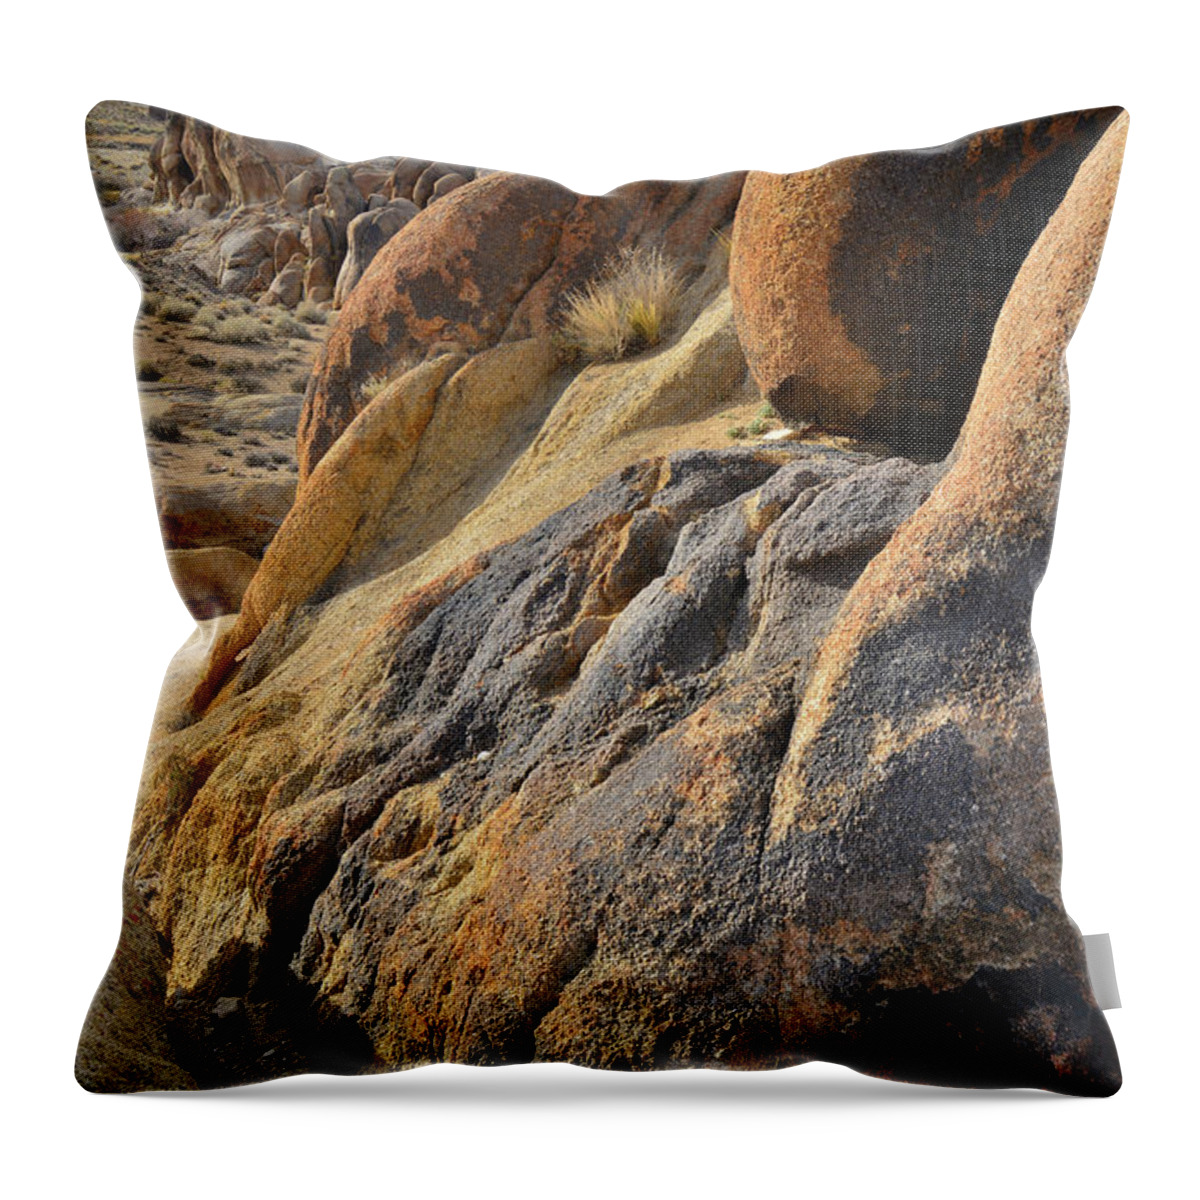 Alabama Hills Throw Pillow featuring the photograph Golden Boulders in Alabama Hills by Ray Mathis